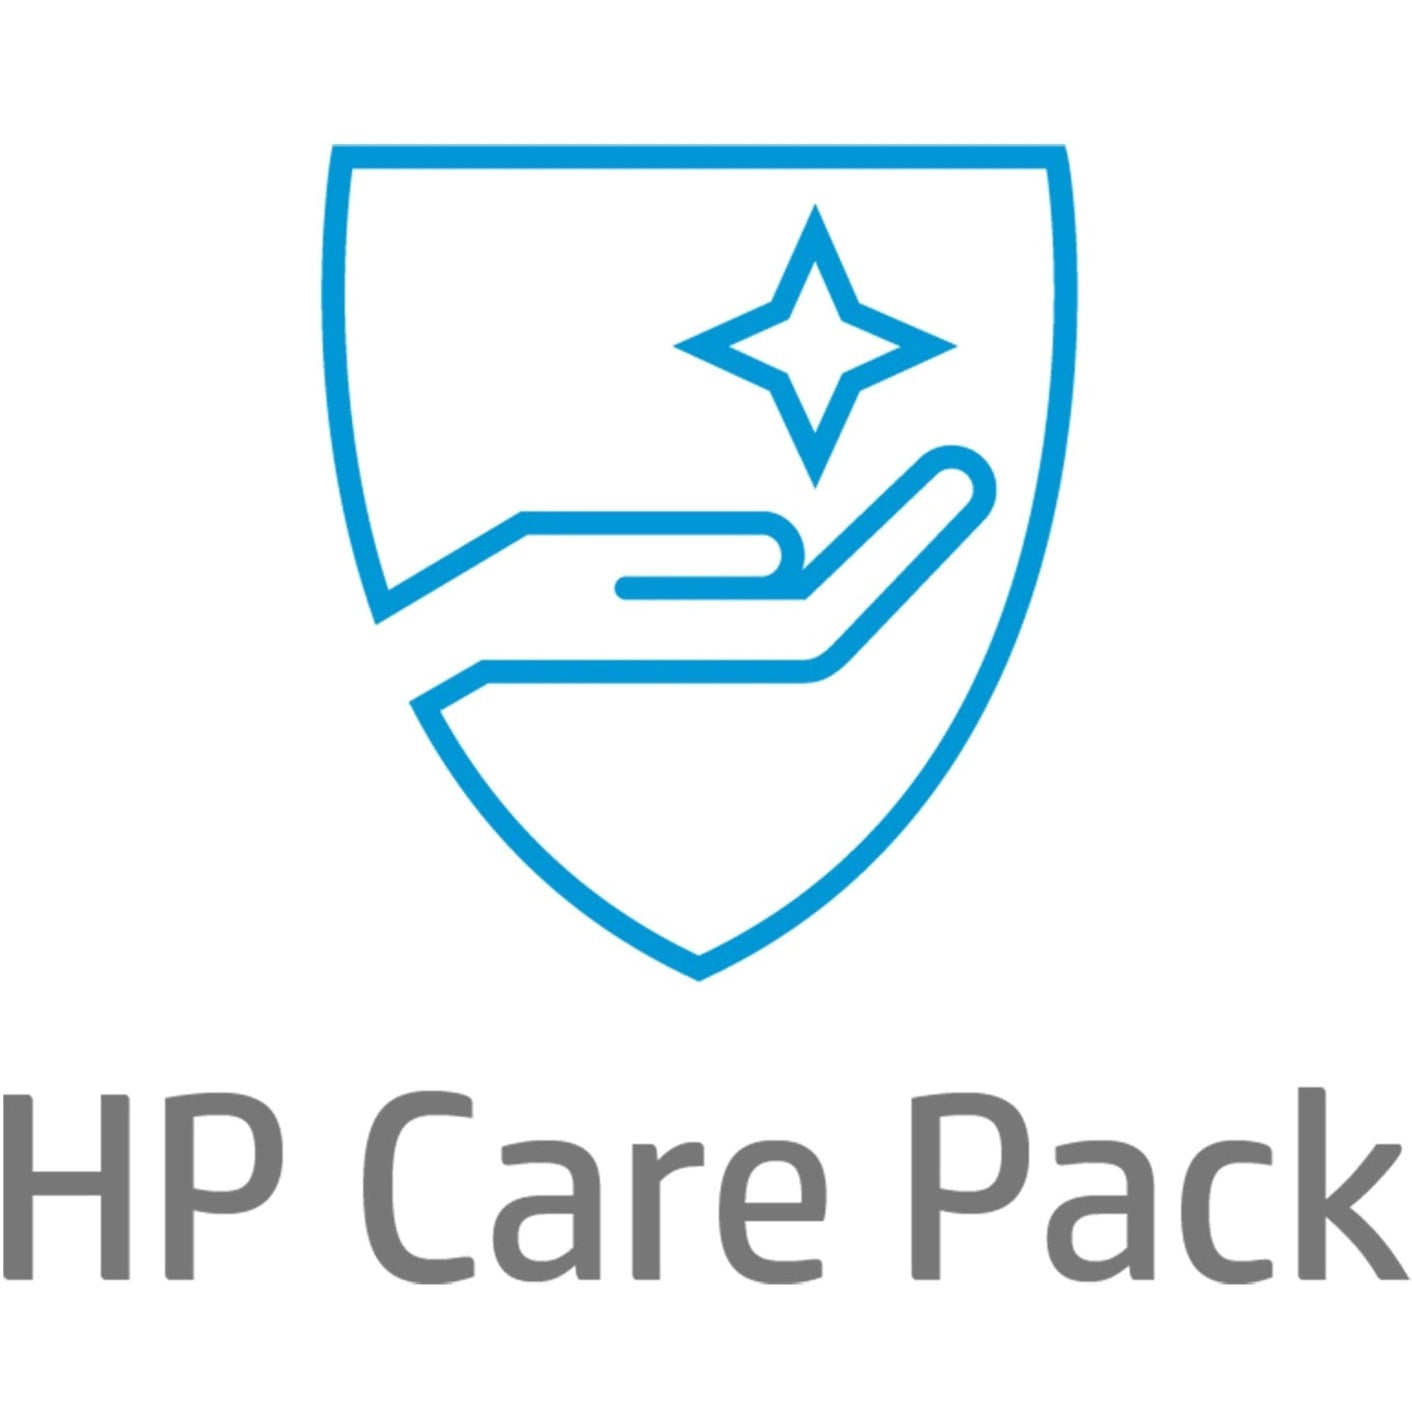 HP Care Pack - Extended Service - 3 Year - Service (UL680E)